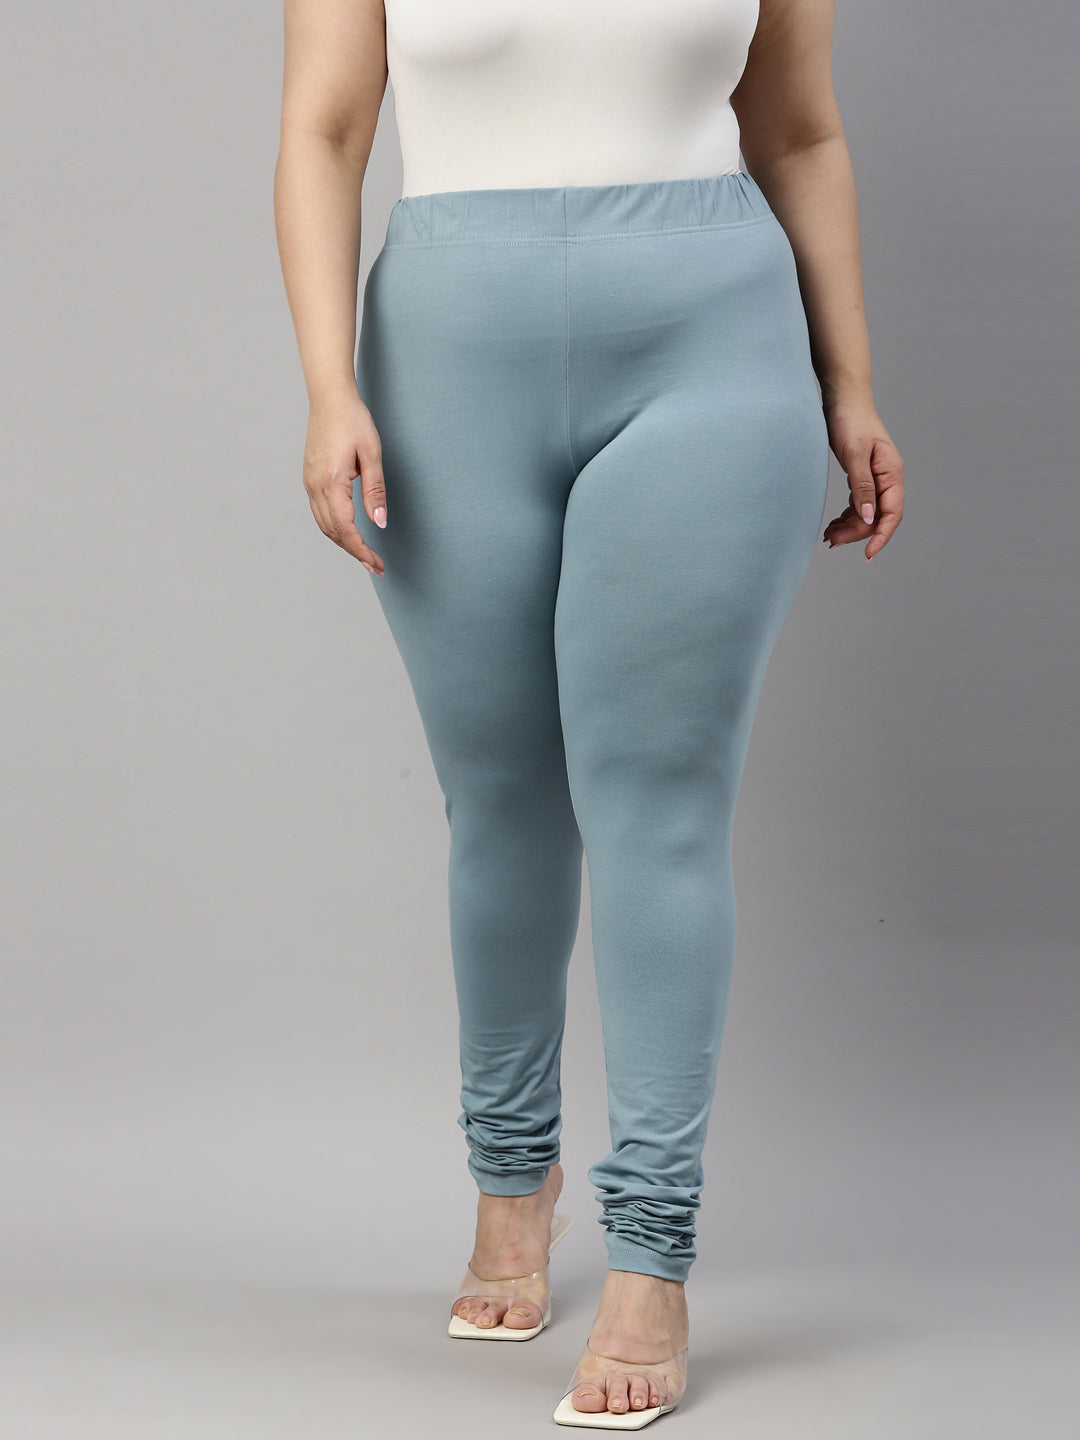 Buy GO COLORS Grey Womens Solid Leggings | Shoppers Stop